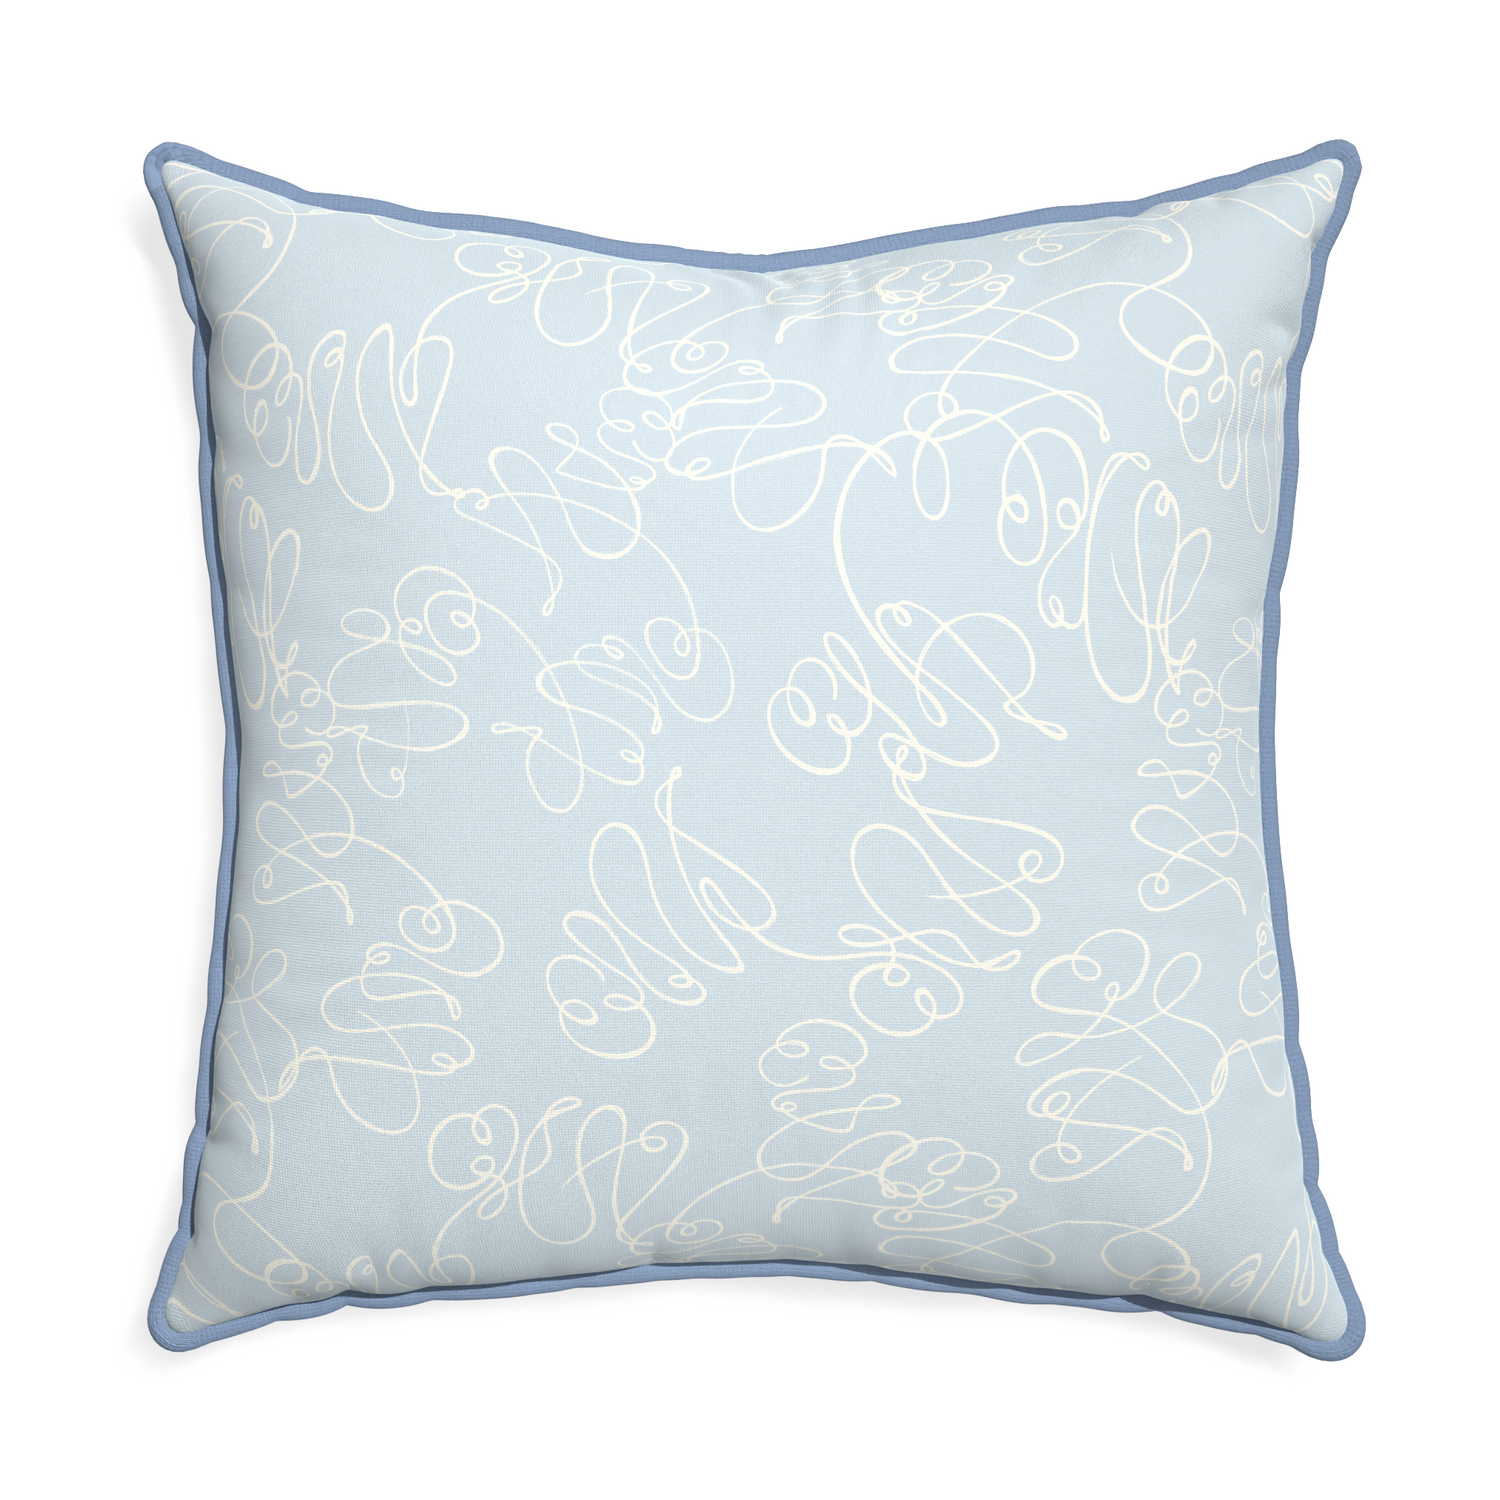 Euro-sham mirabella custom pillow with sky piping on white background